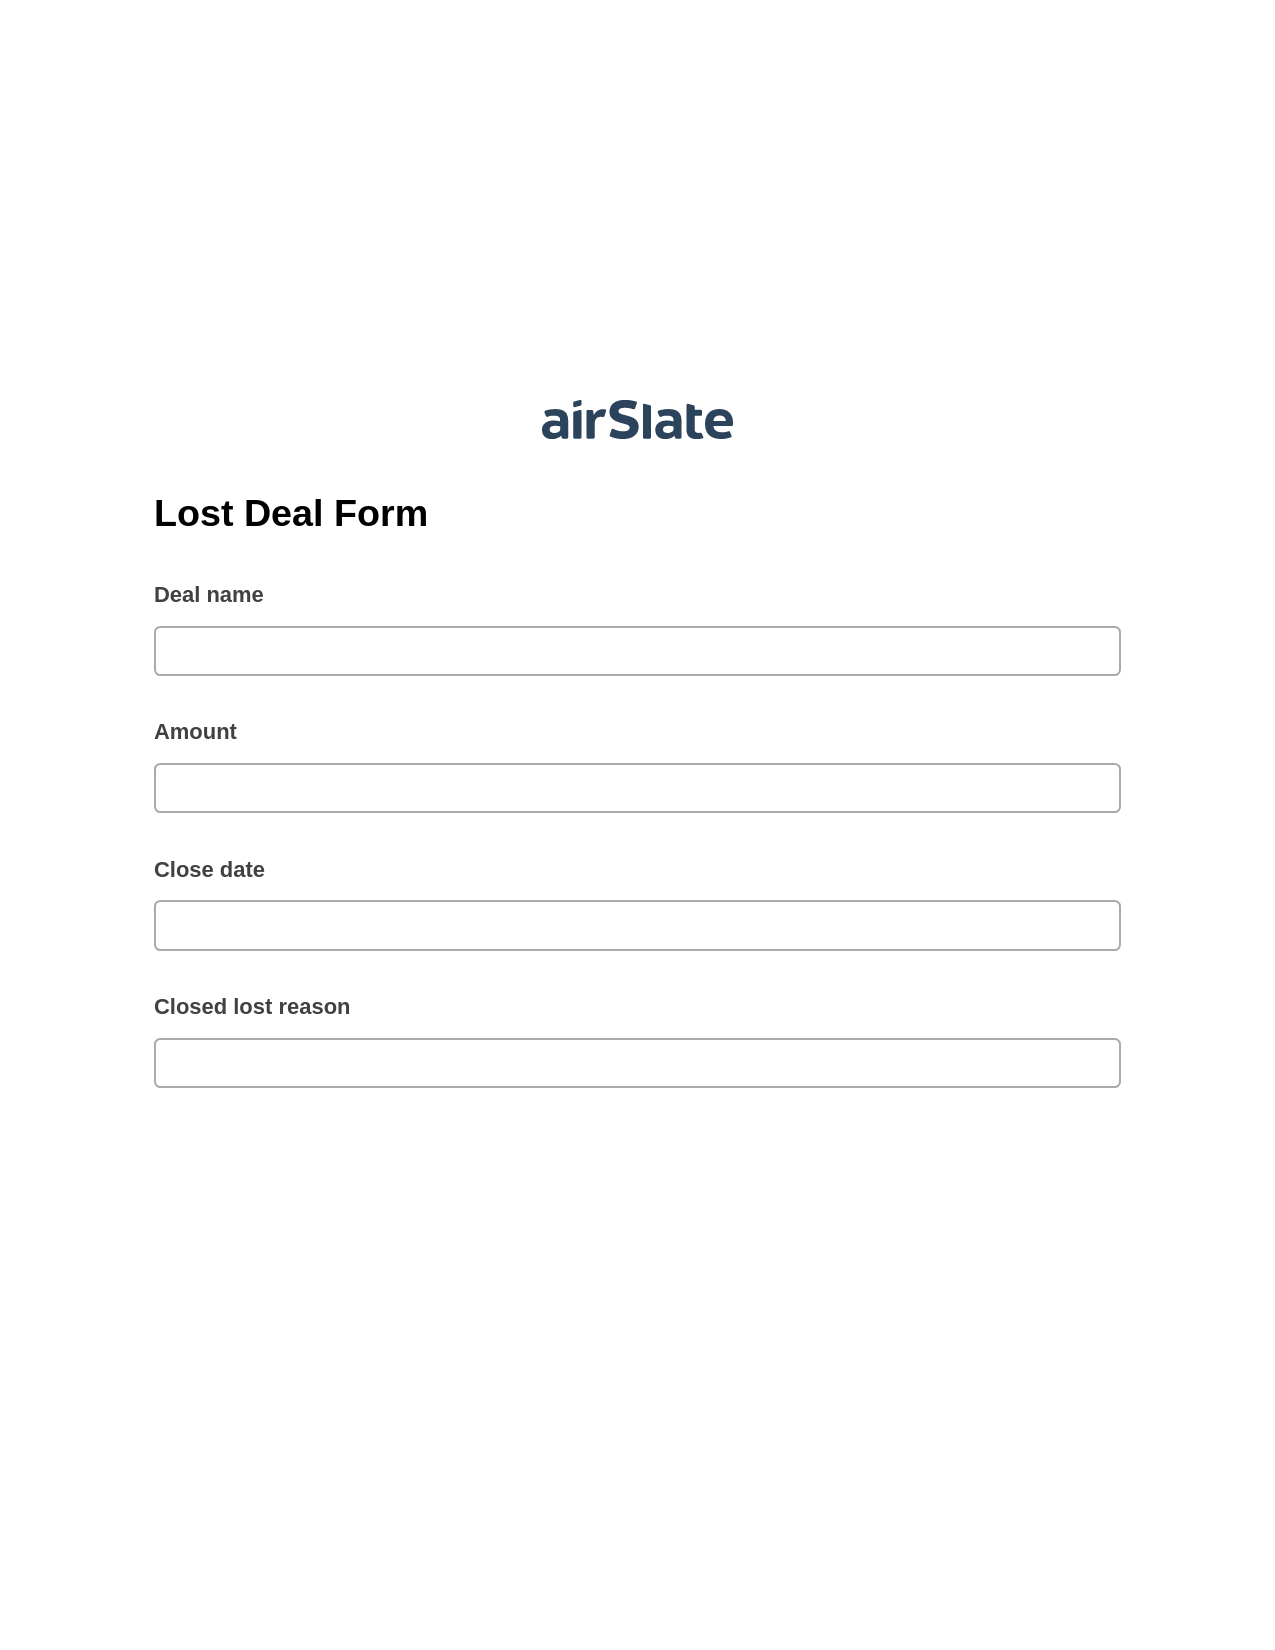 Lost Deal Form Pre-fill Document Bot, Add Tags to Slate Bot, Archive to SharePoint Folder Bot